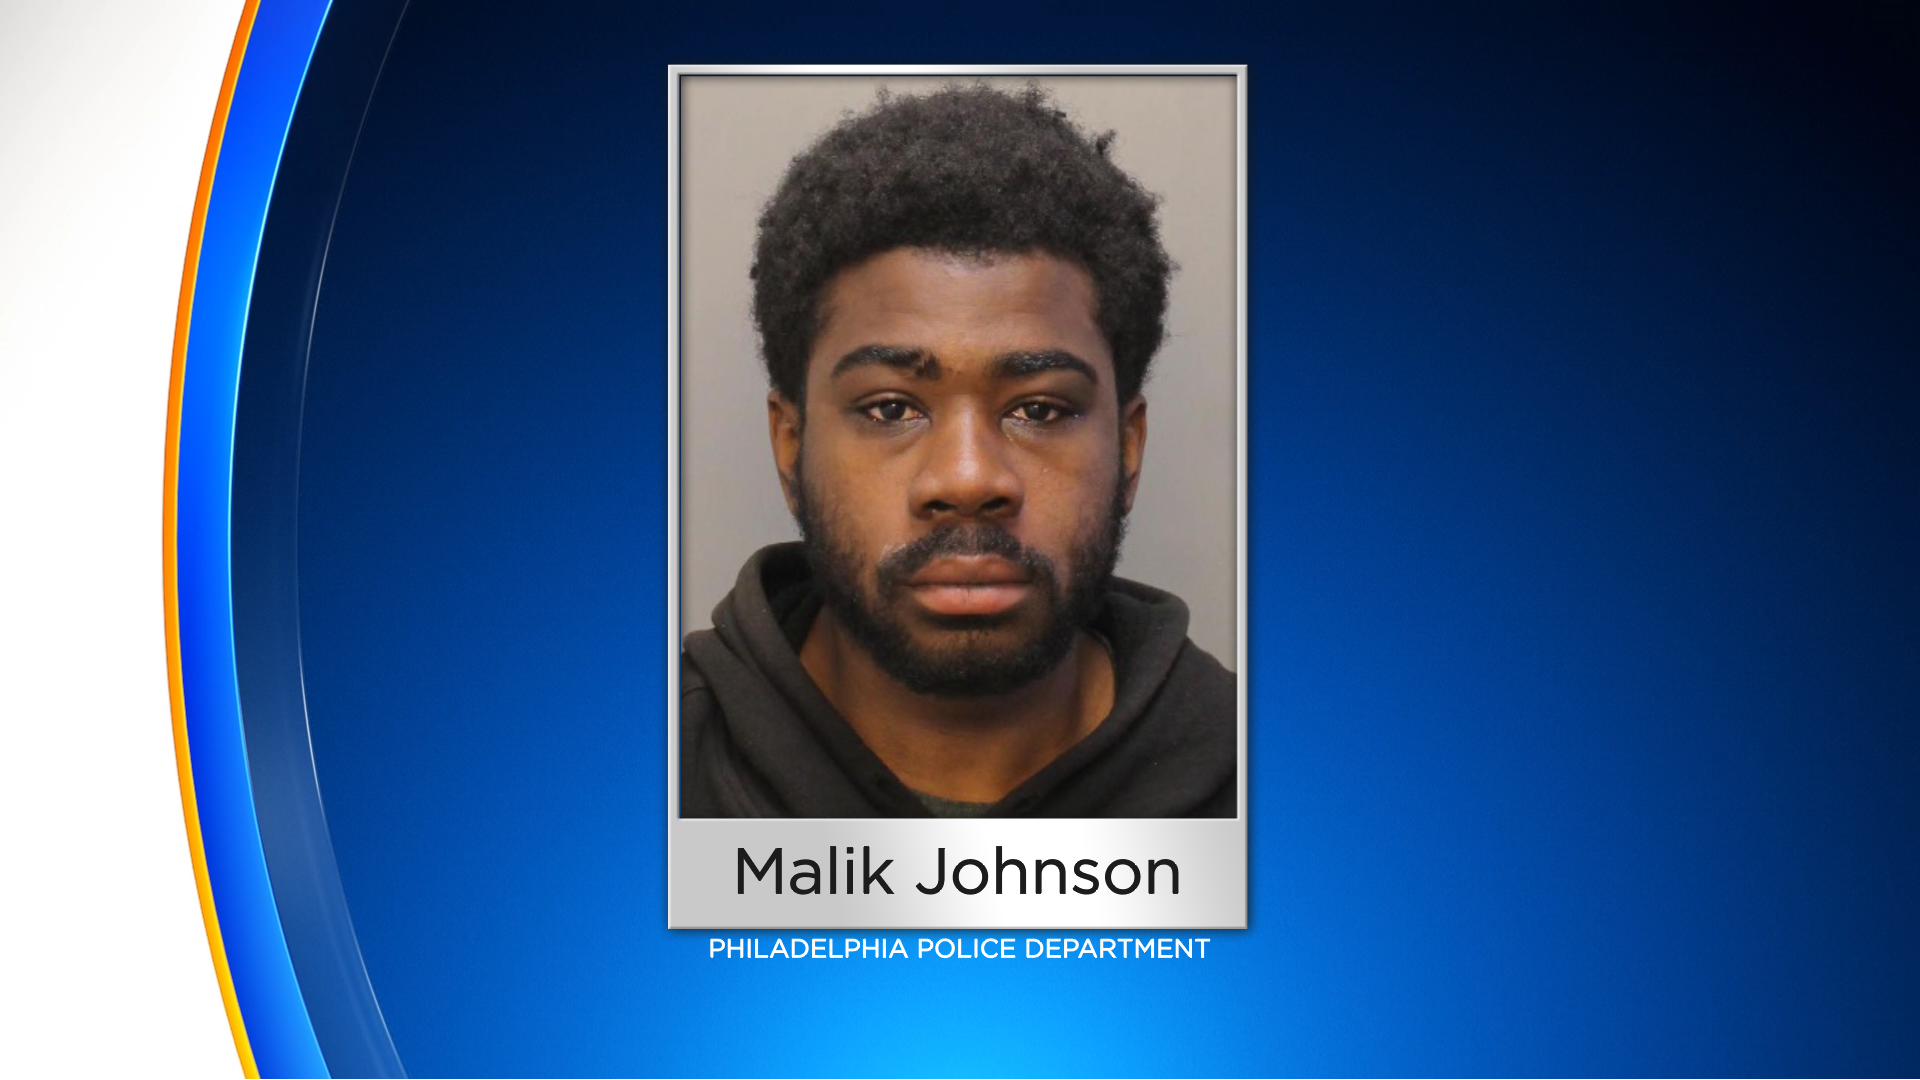 Malik Johnson Charged With Aggravated Assault After Injuring 2 Cops During Chaotic Chase In Philadelphia: Police